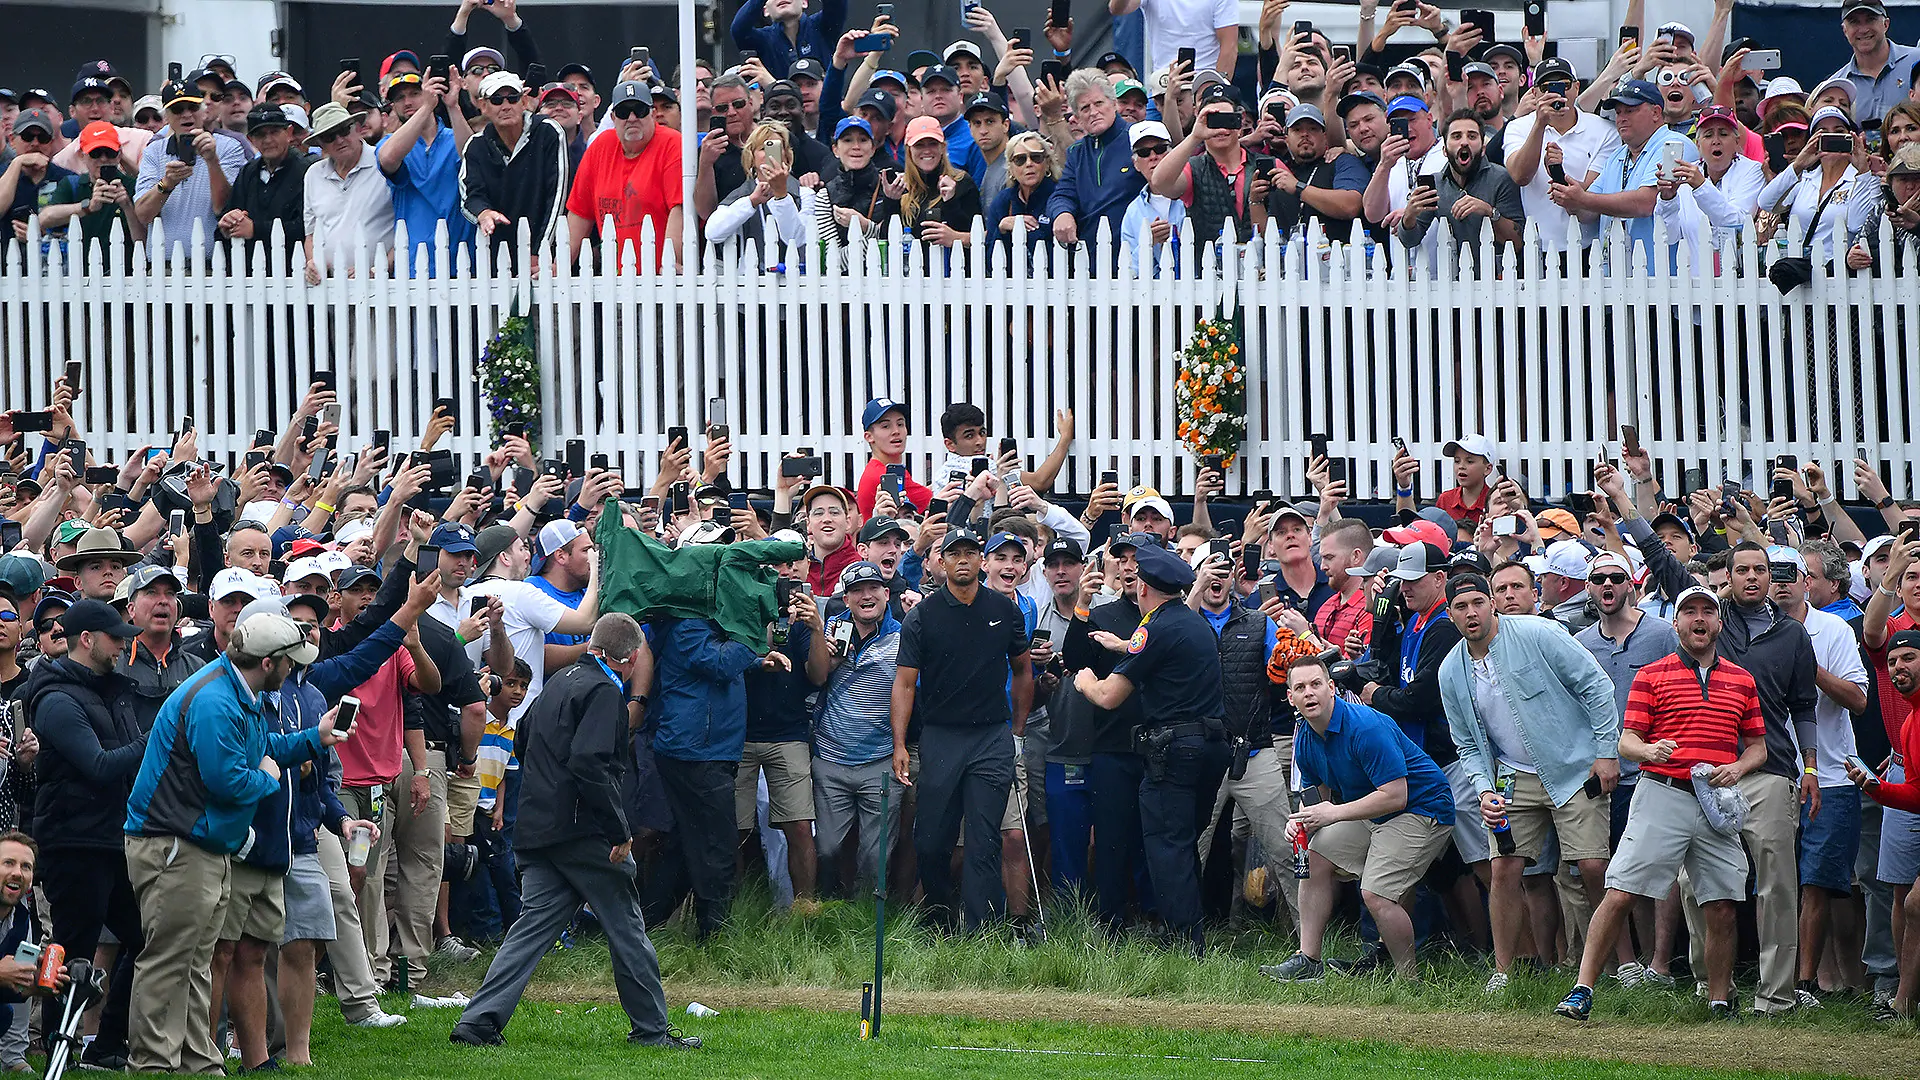 Watch: Chaos encircles Tiger after errant shot on first hole